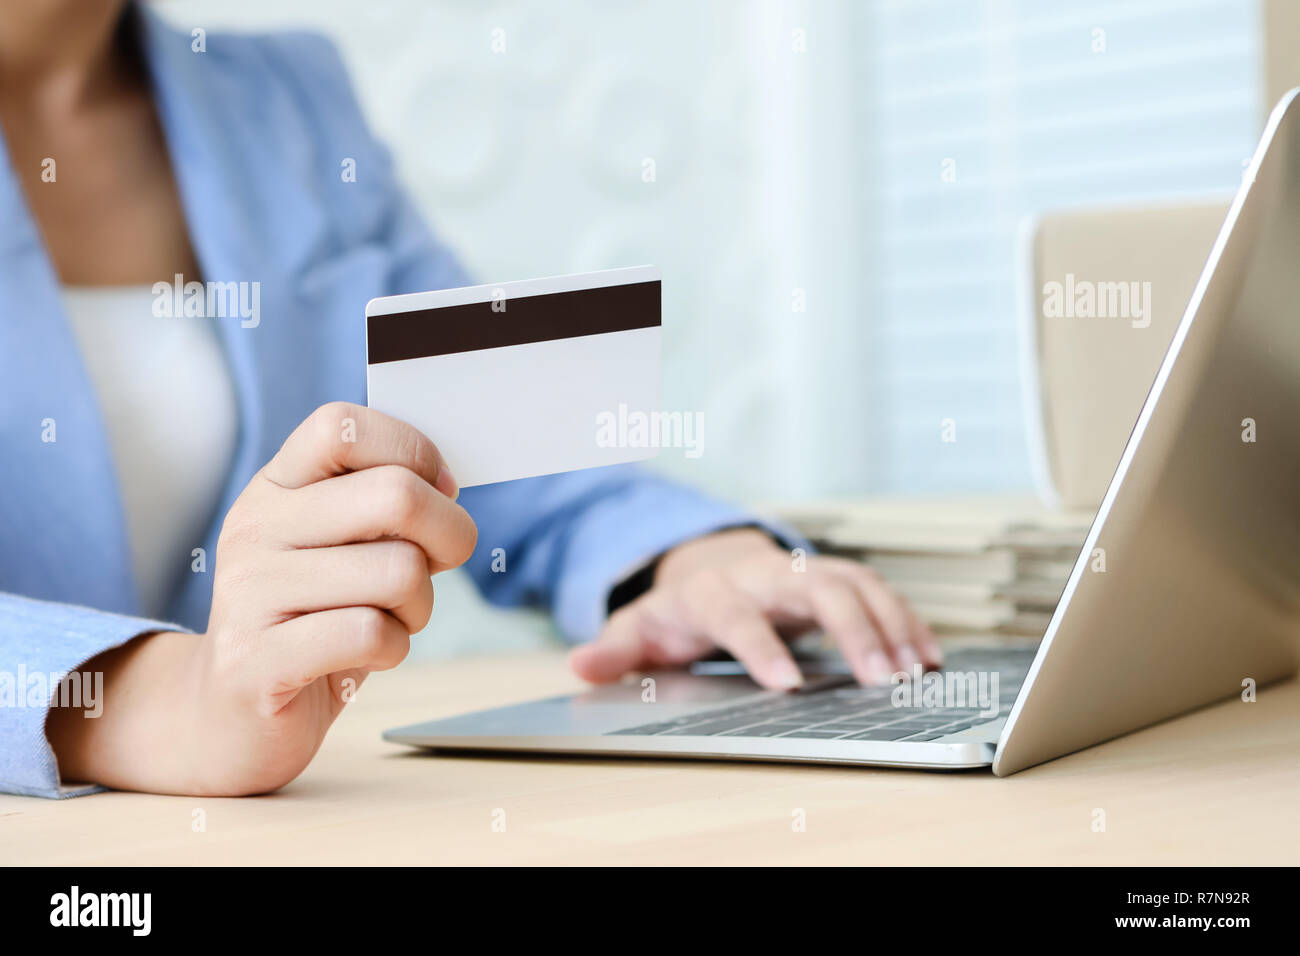 Hand holding credit card typing on the keyboard of laptop for online shopping ecommerce concept Stock Photo